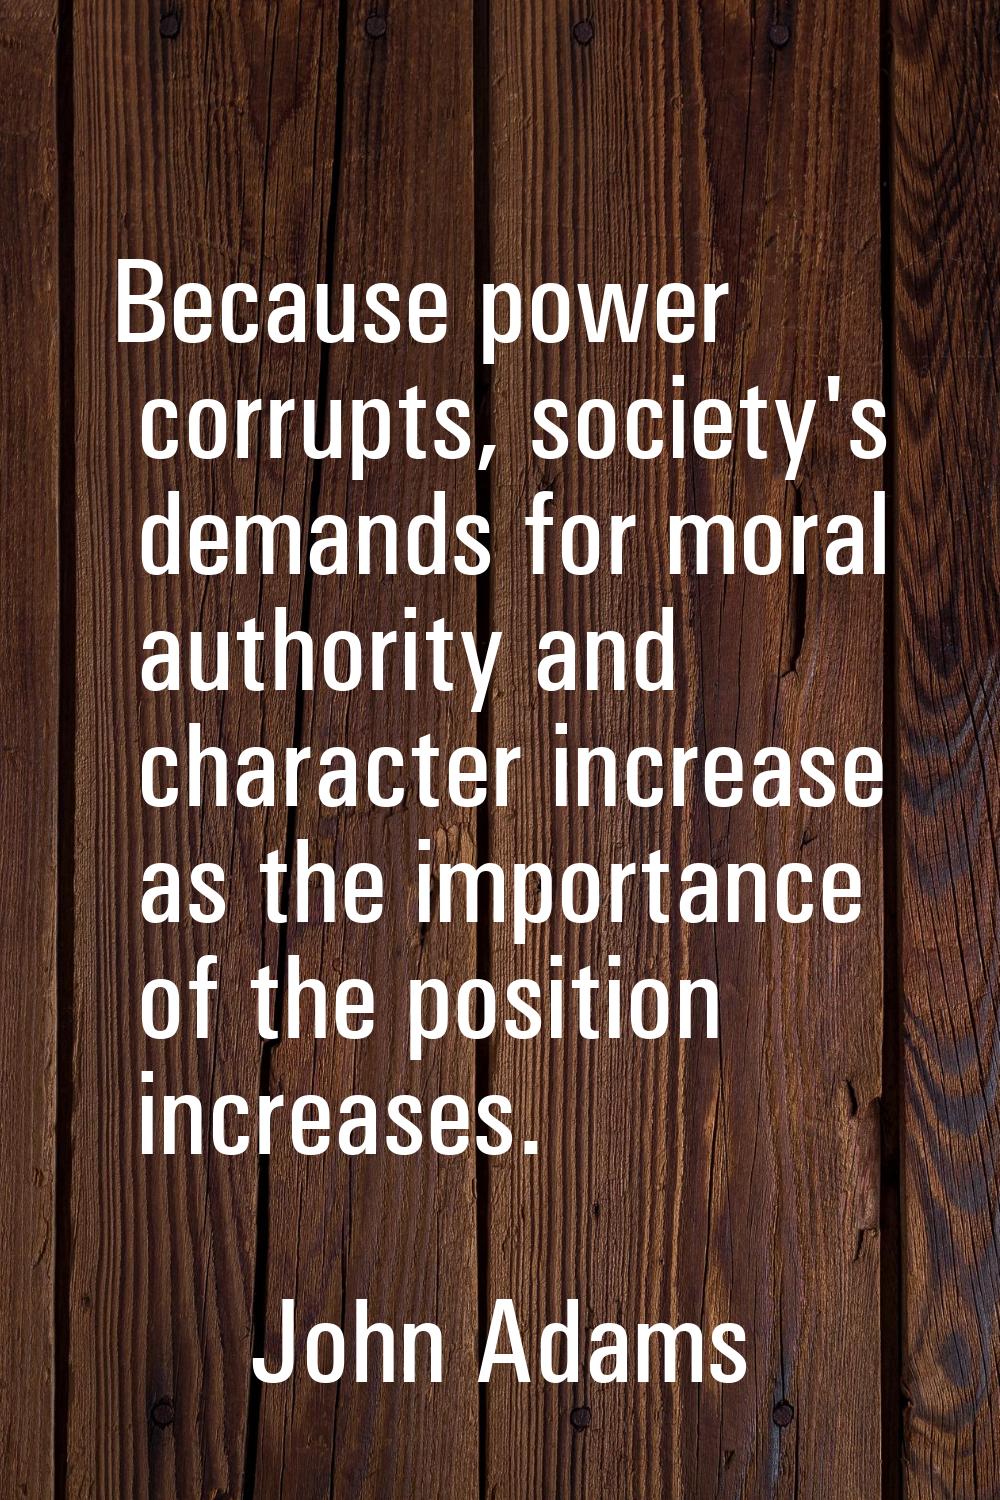 Because power corrupts, society's demands for moral authority and character increase as the importa